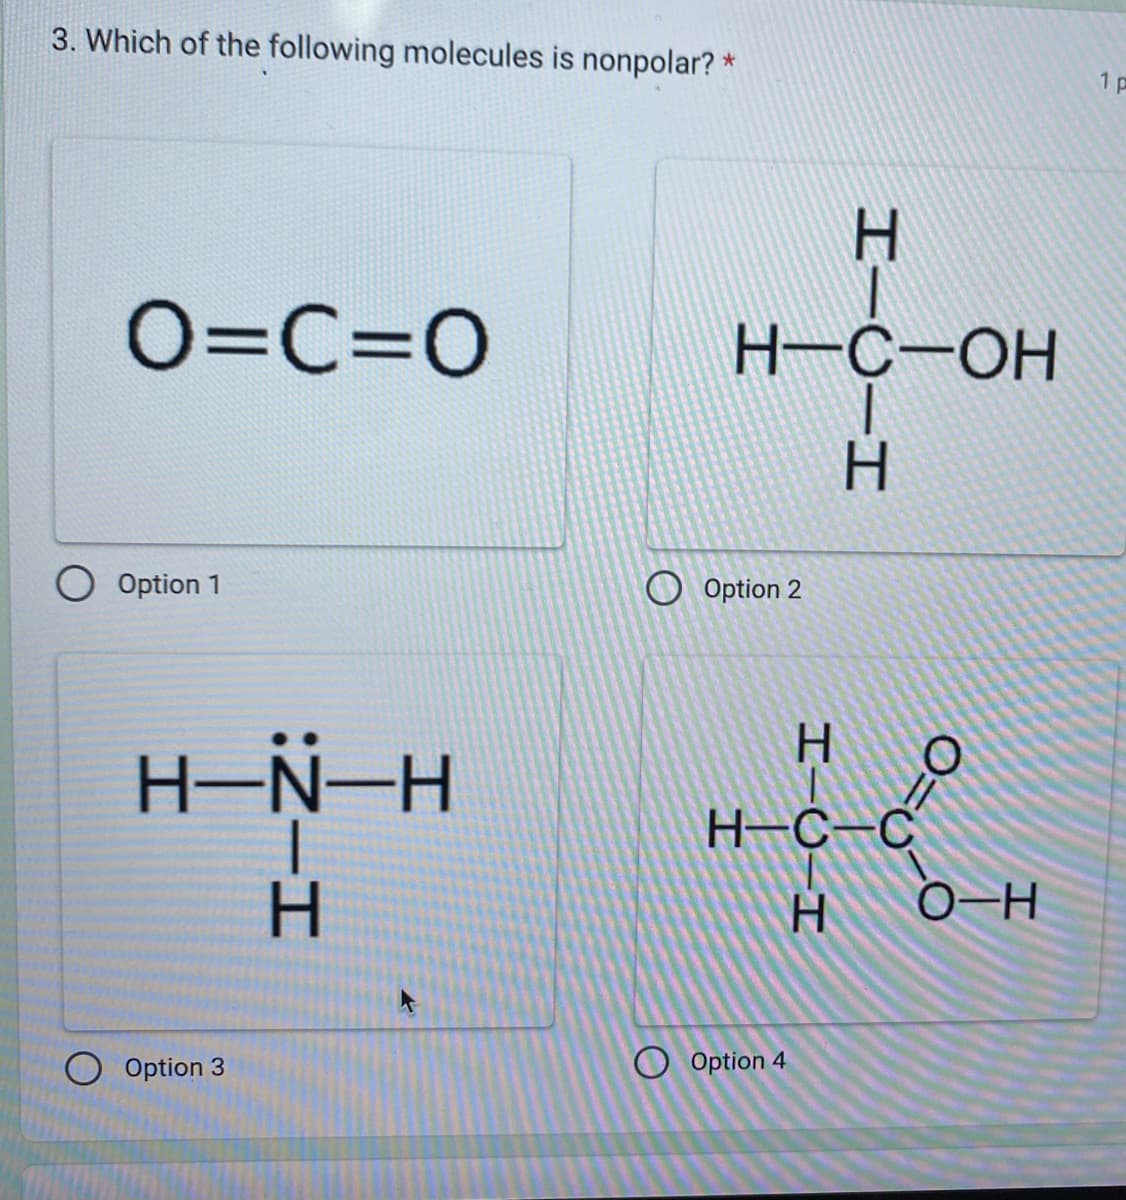 3. Which of the following molecules is nonpolar?
O=C=O
O Option 1
H-N-H
:Z-H
Option 3
Н
*
H-C-OH
Option 2
HIC H
HIC H
O Option 4
Н
H-C-C
0=0
O-H
1 p